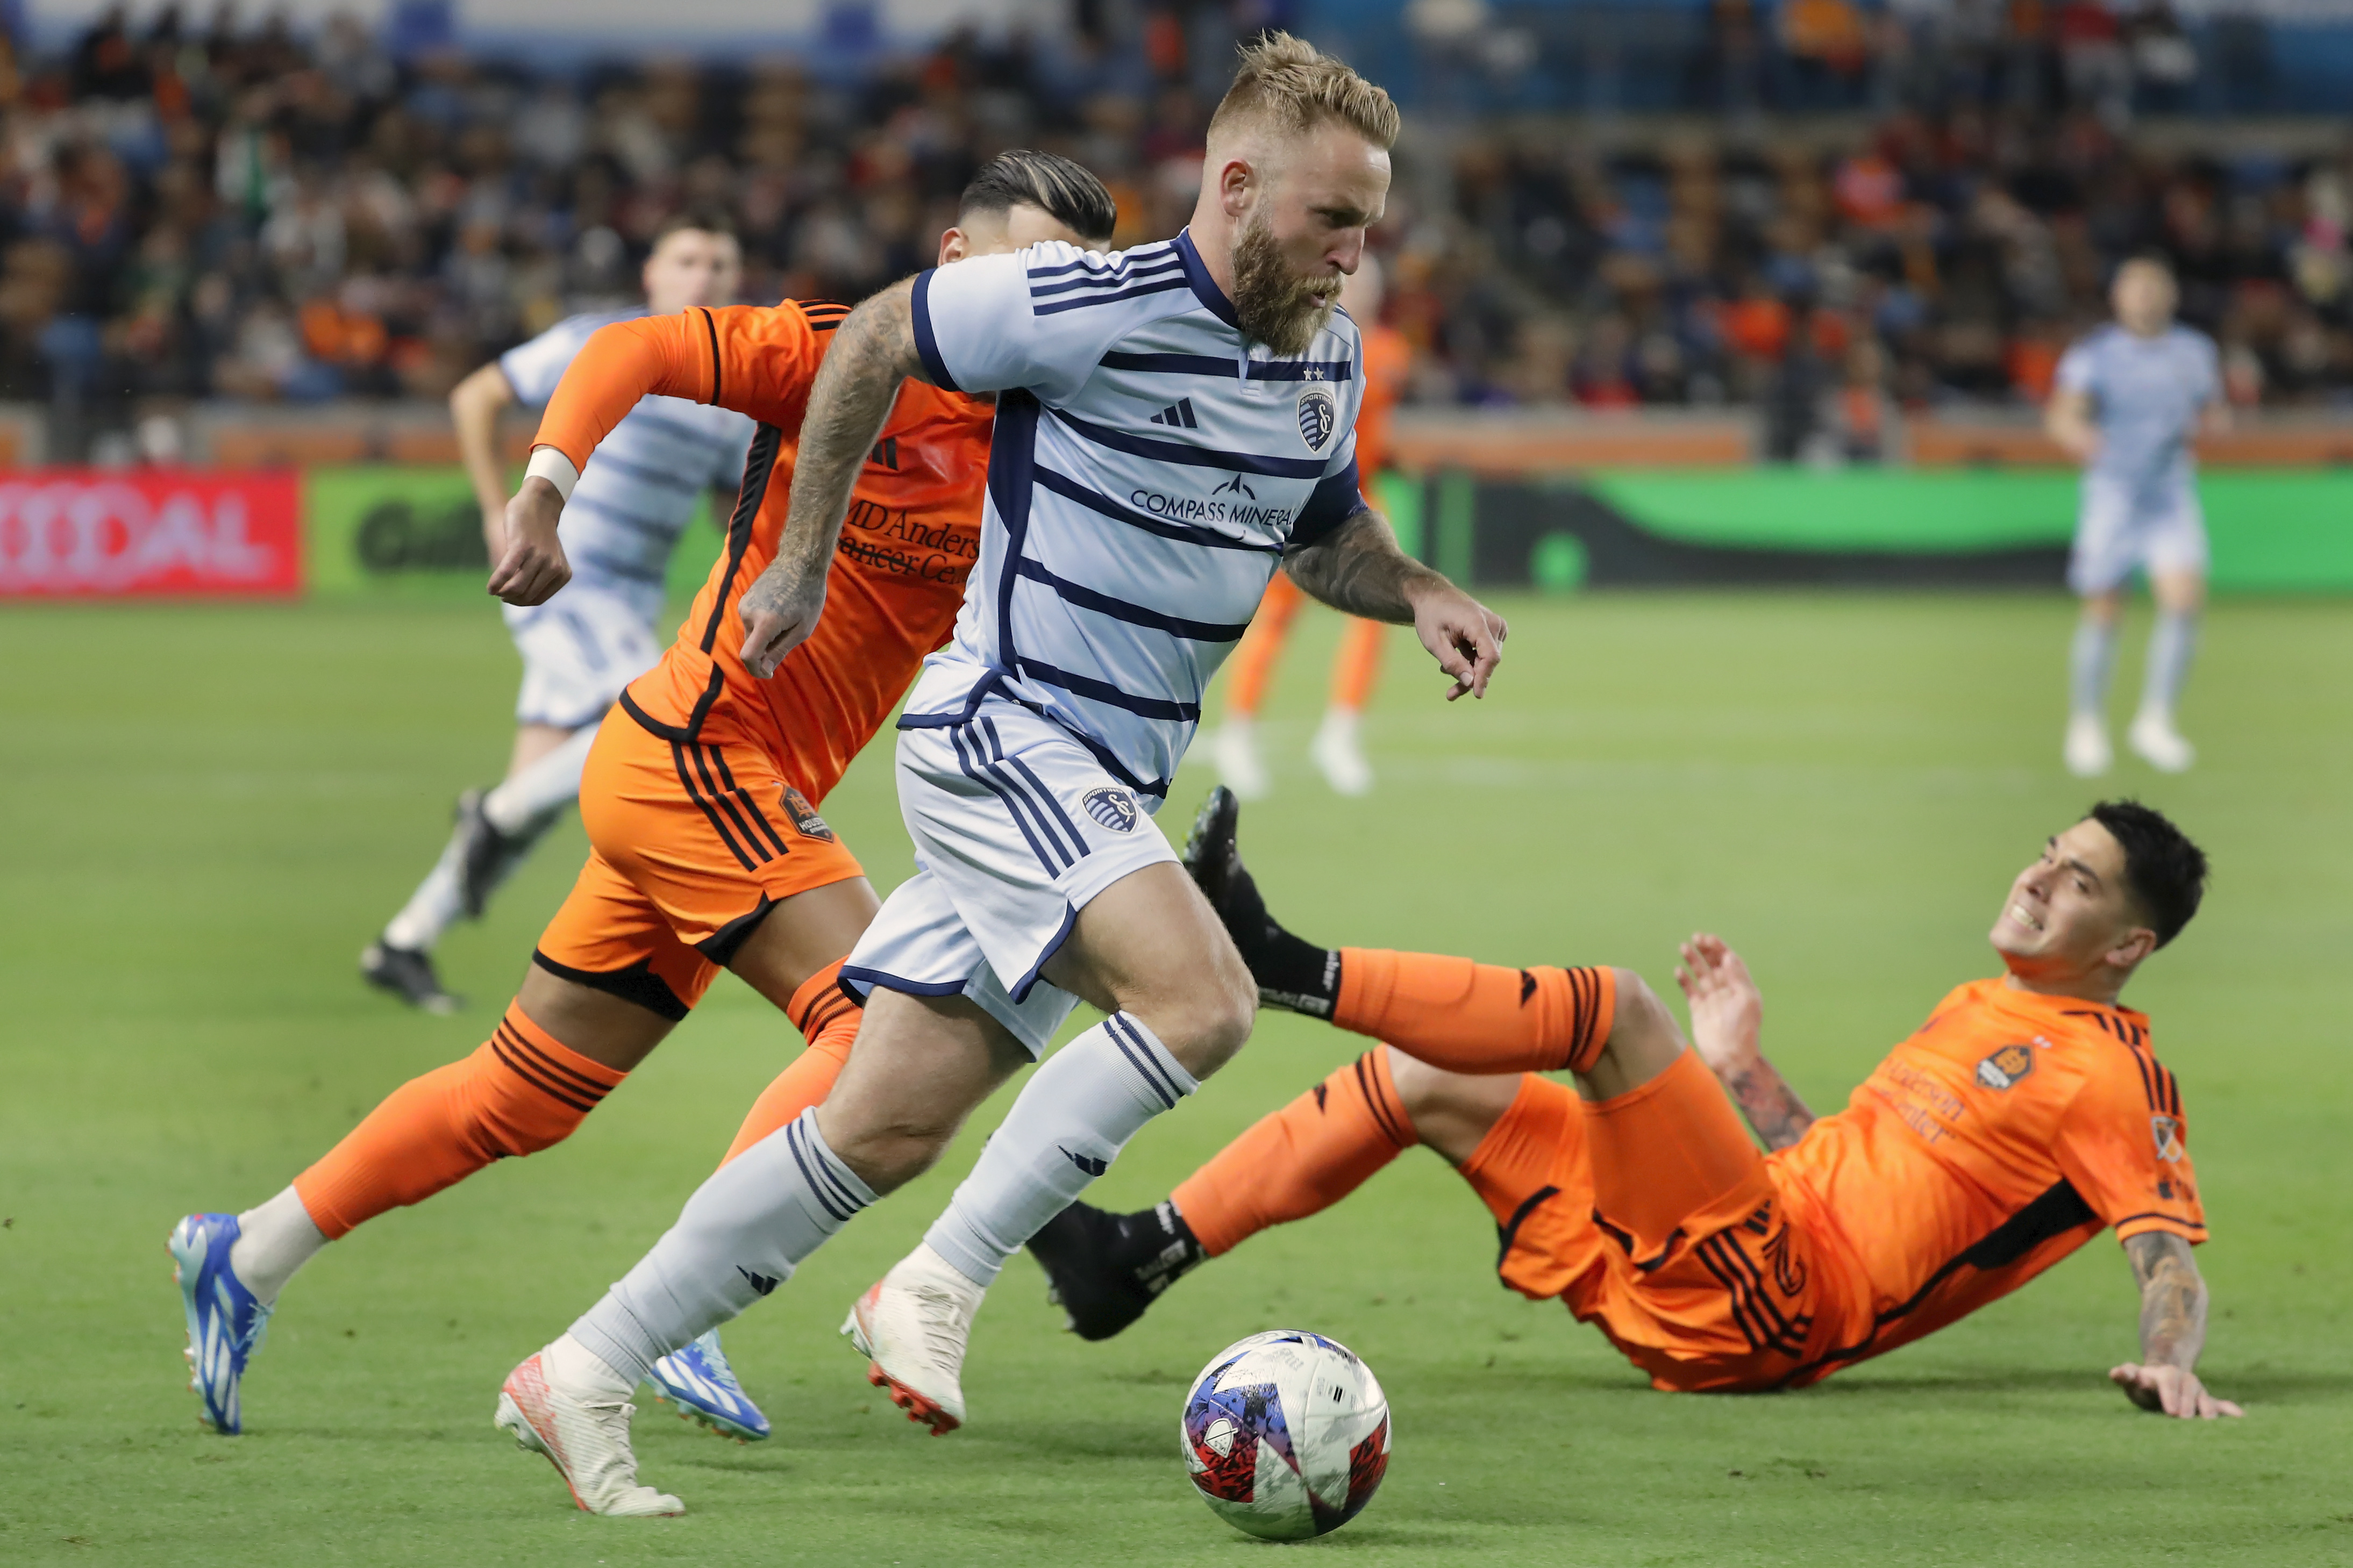 Leagues Cup News  Sporting Kansas City